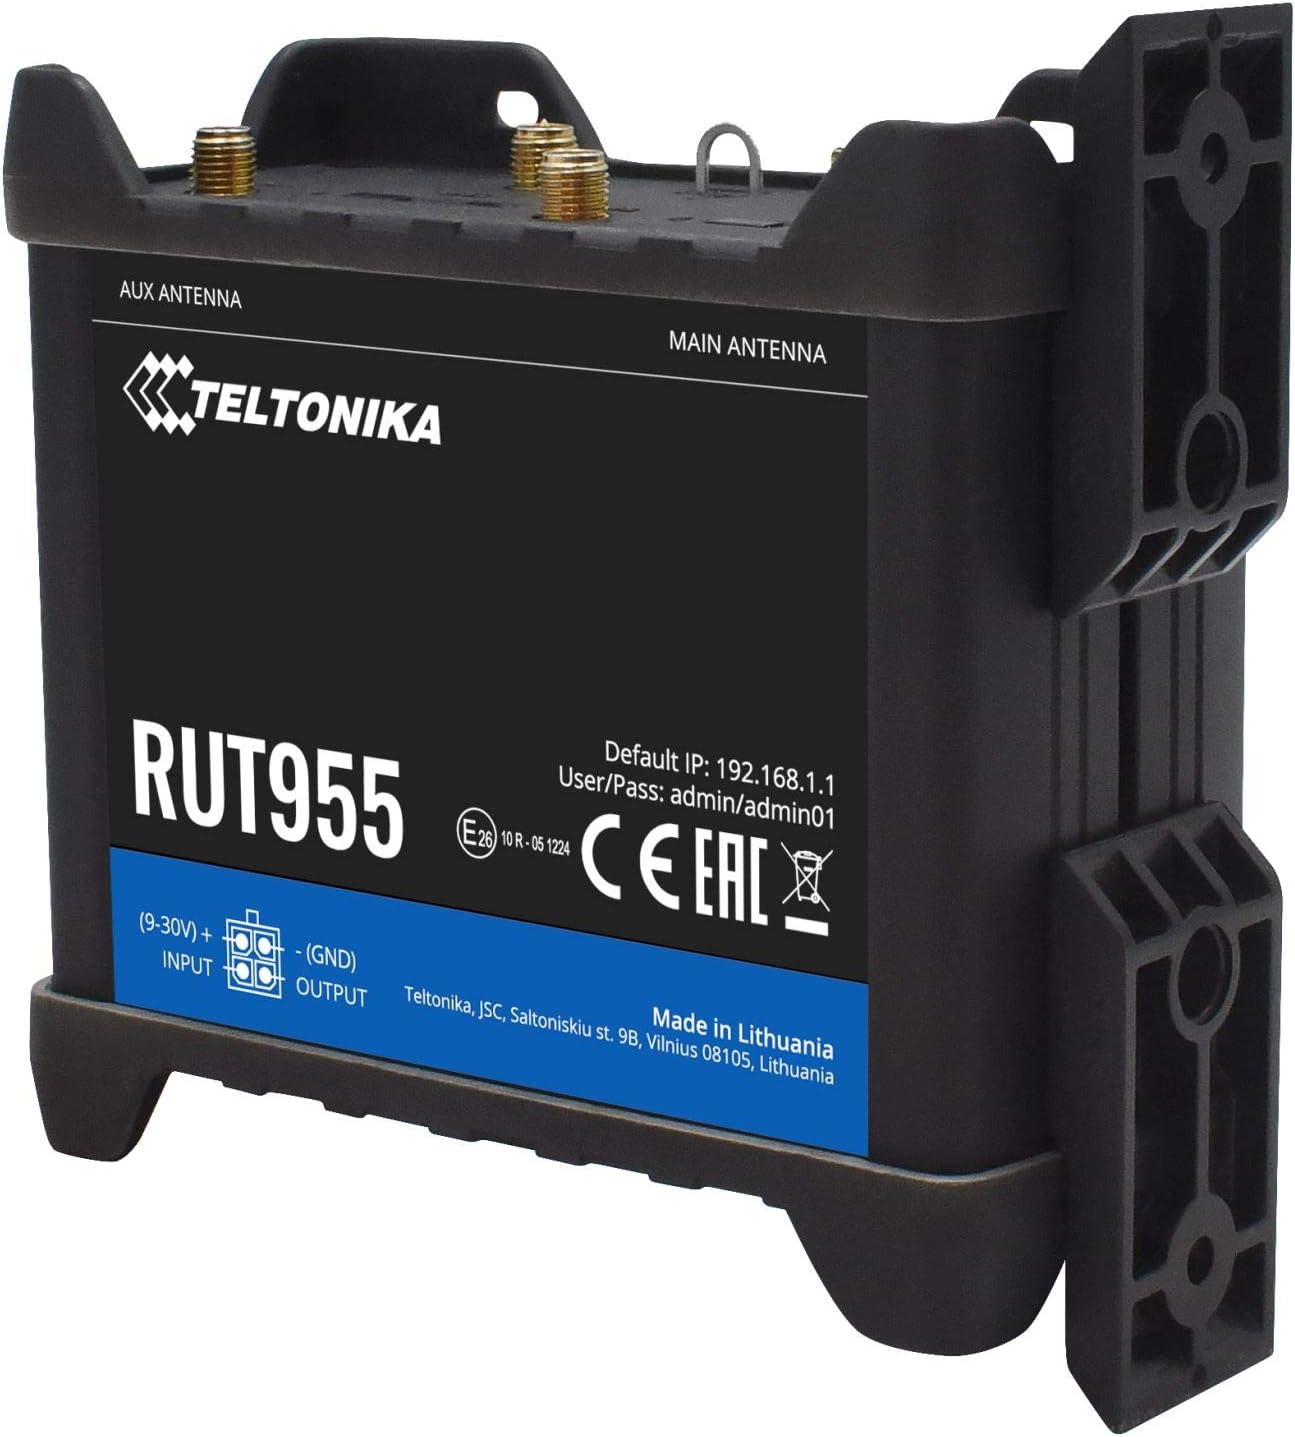 Teltonika RUT955J034S0 Model RUT955 Industrial Cellular Router, Black; for use with AT&amp;T, Bell, and T-Mobile Only; 4G and 3G Frequencies; Dual SIM with Failover; Multiple Interfaces; GNSS